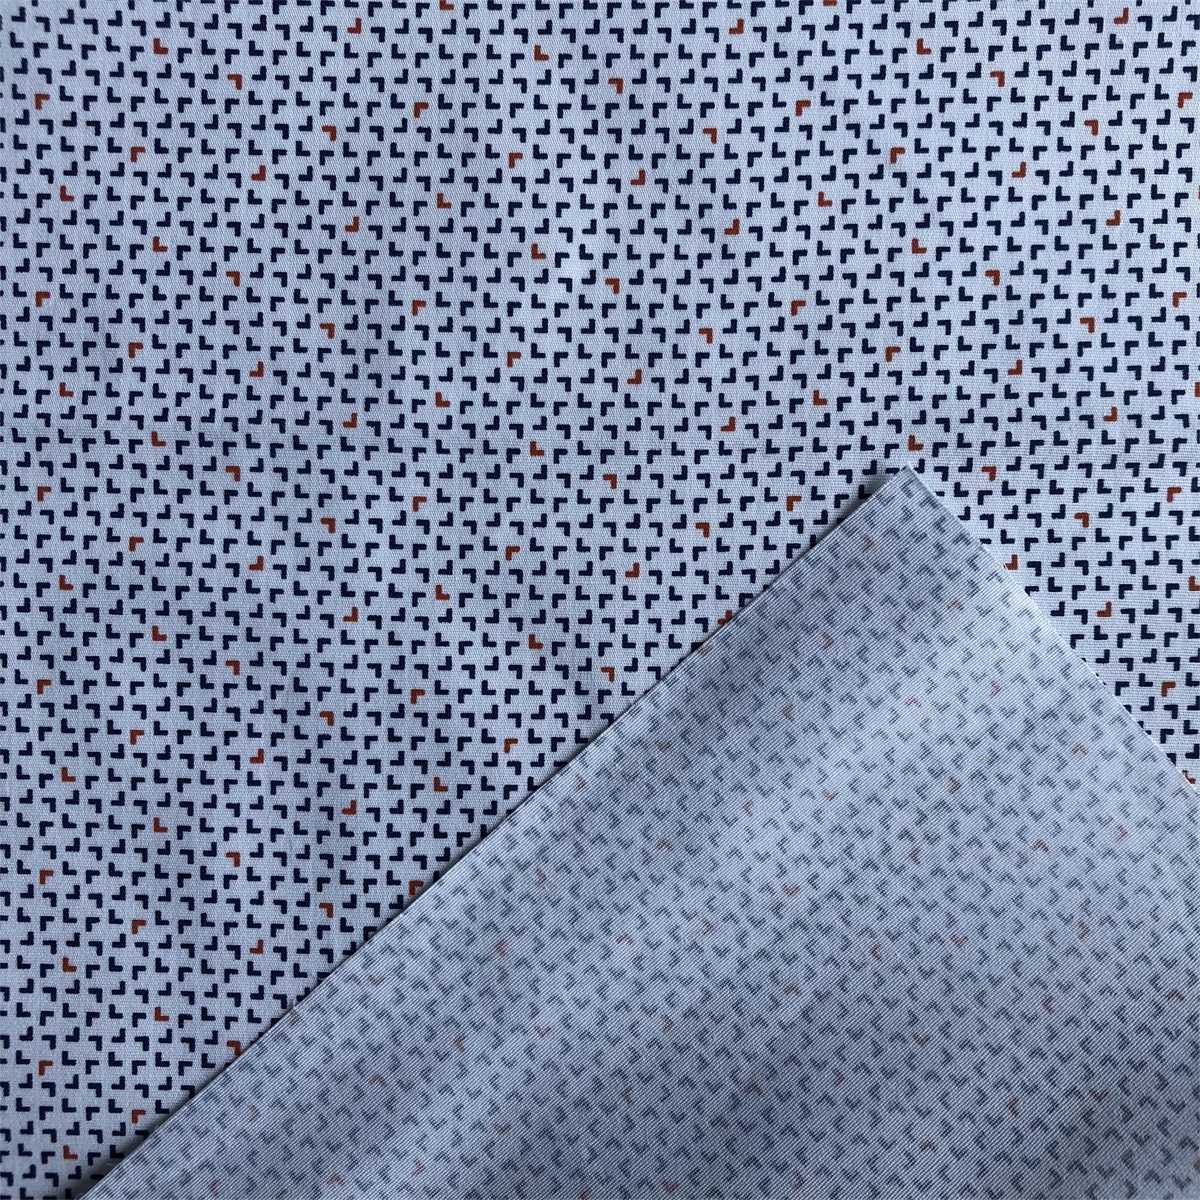 Cotton Spandex Printed Fabric by compact yarn for men's shirts 98 cotton 2 spandex elasthane poplin printed shirts woven fabric